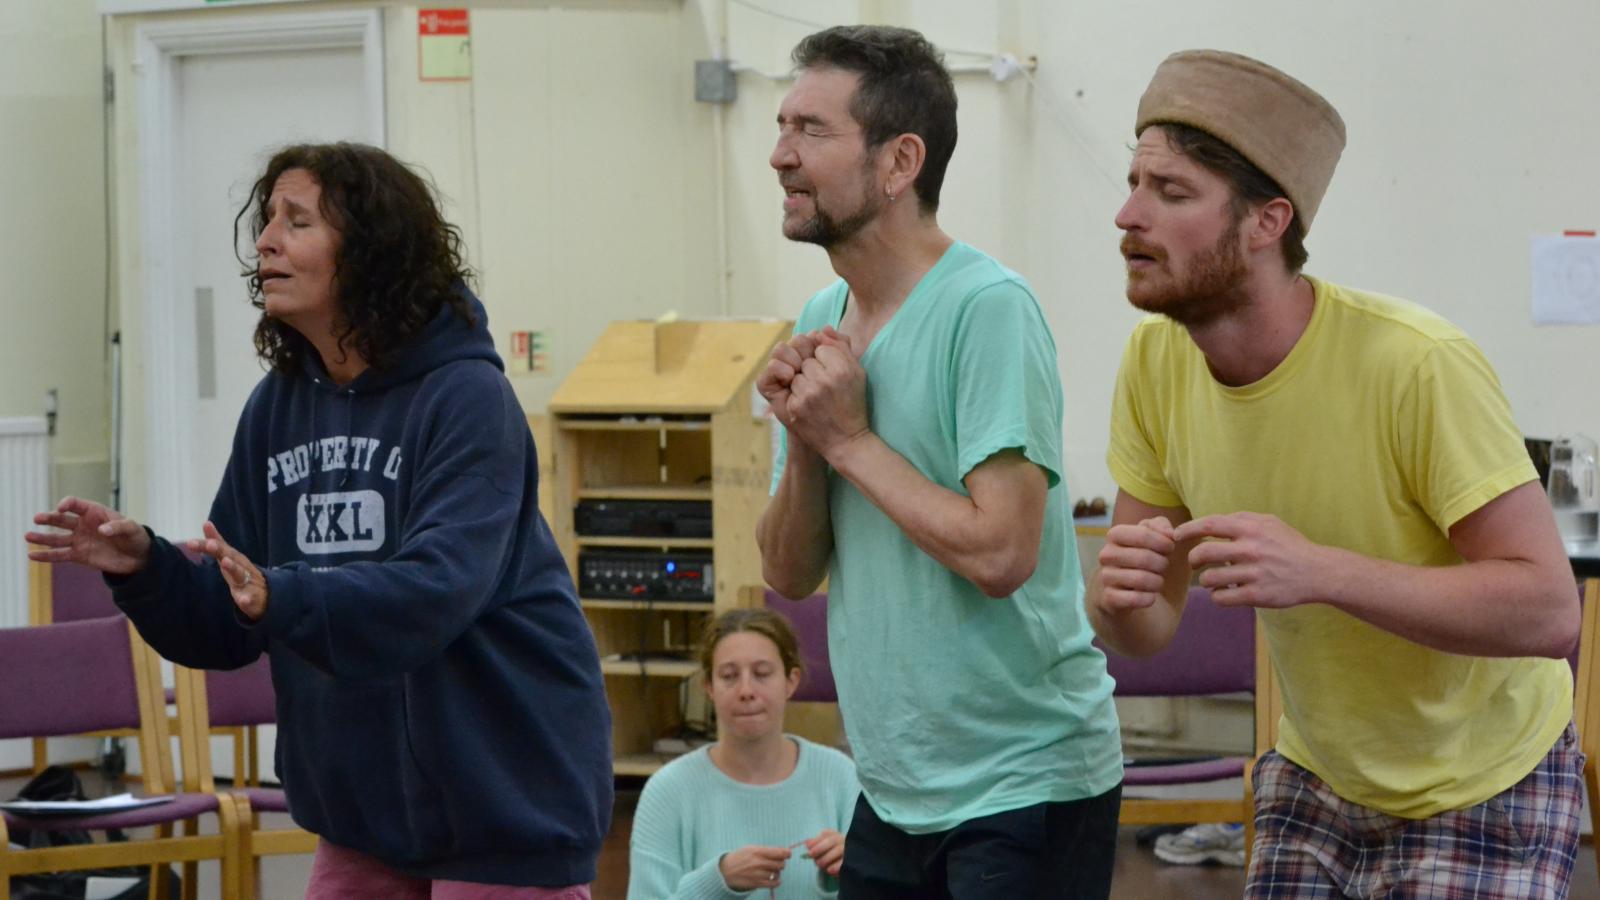 Actors rehearsing The Tempest in the RSC rehearsal room. Left to right: Ohio State Visiting Assistant Professor Robin Post, RSC Actors Eva Lily Tausig, Greg Hicks, and Chris McDonald. June, 2014, The RSC Rehearsal room in London, England.